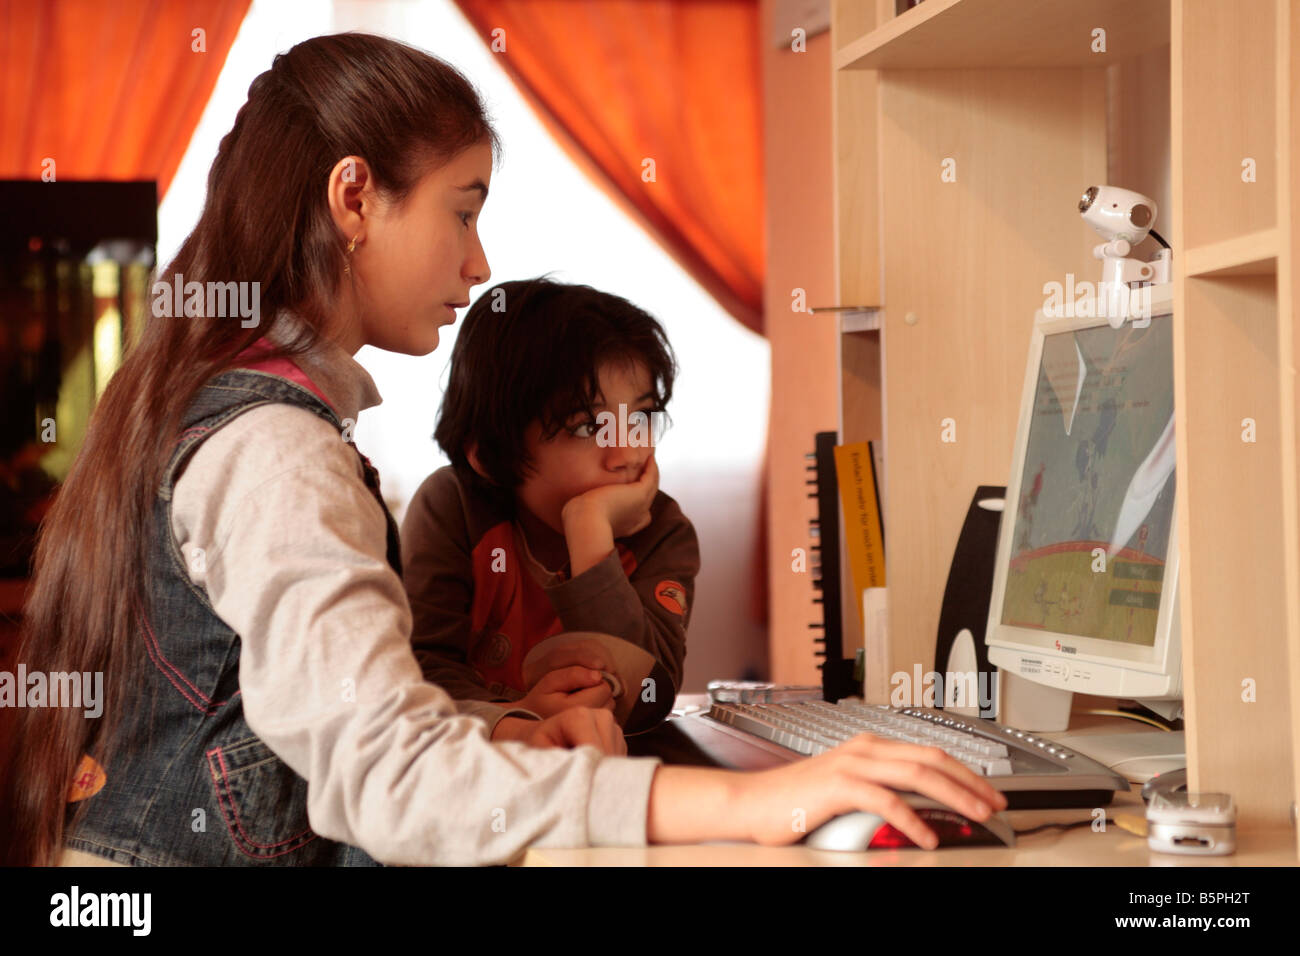 two young children playing nonviolent computer games Stock Photo